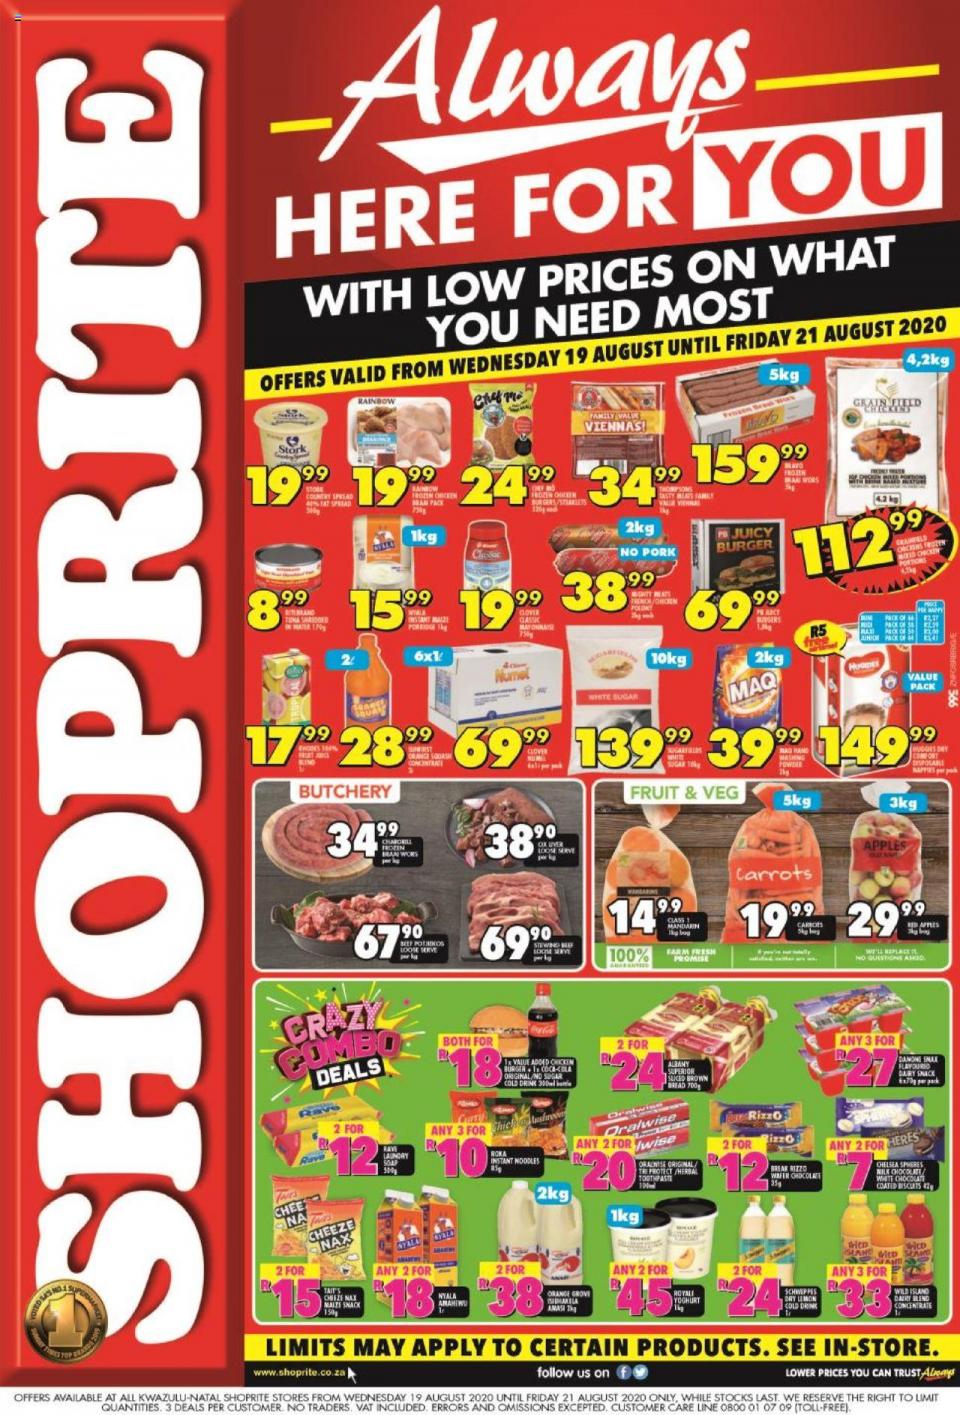 shoprite specials always here for you 19 august 2020